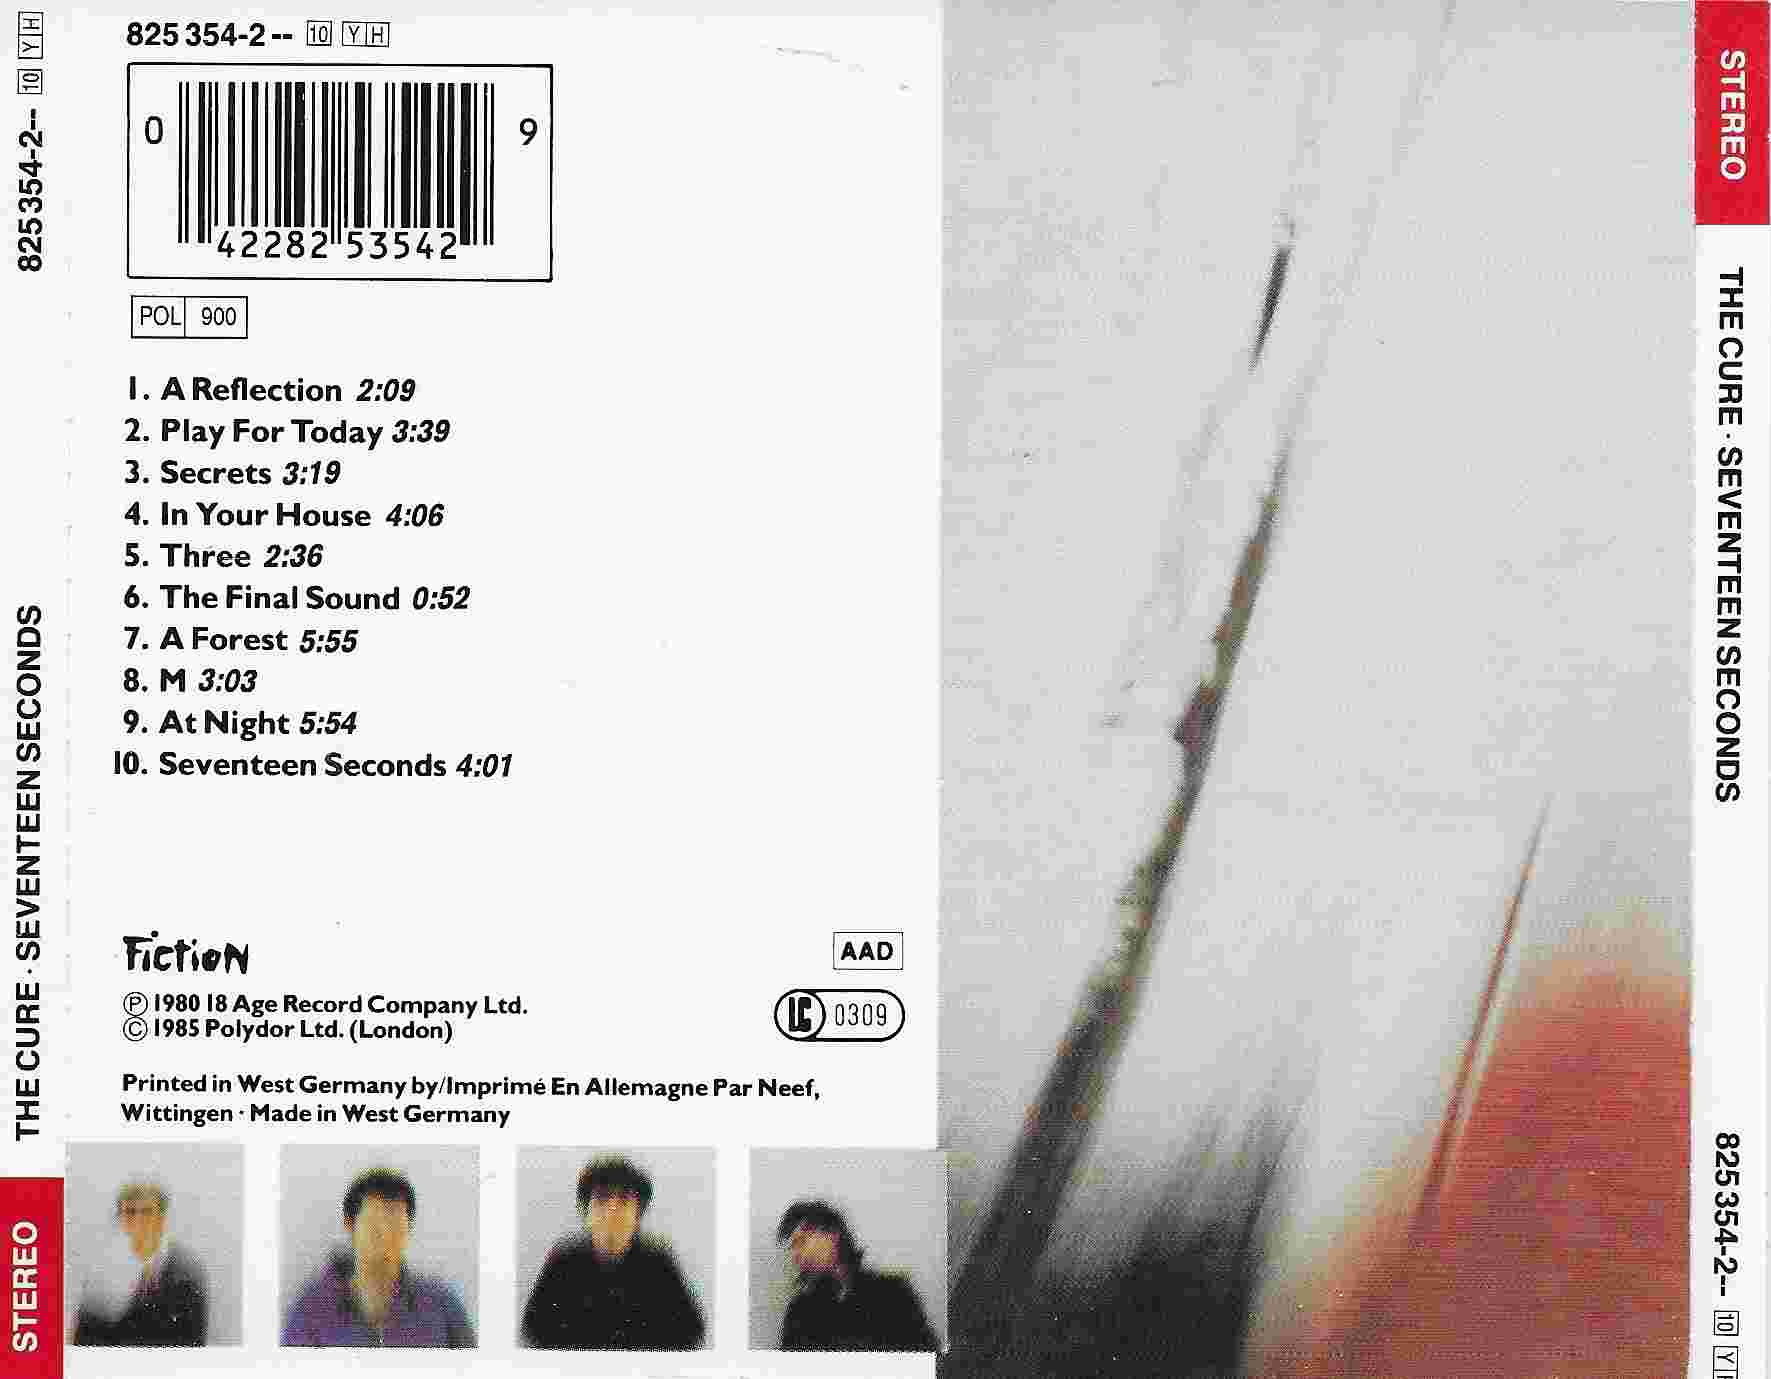 Picture of 825354 - 2 Seventeen seconds by artist The Cure 